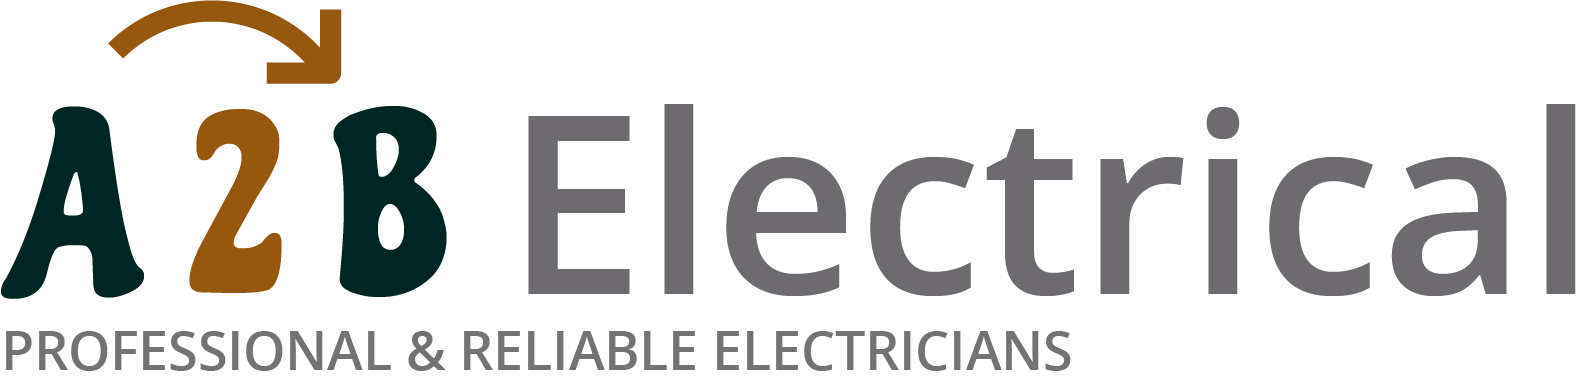 If you have electrical wiring problems in March, we can provide an electrician to have a look for you. 